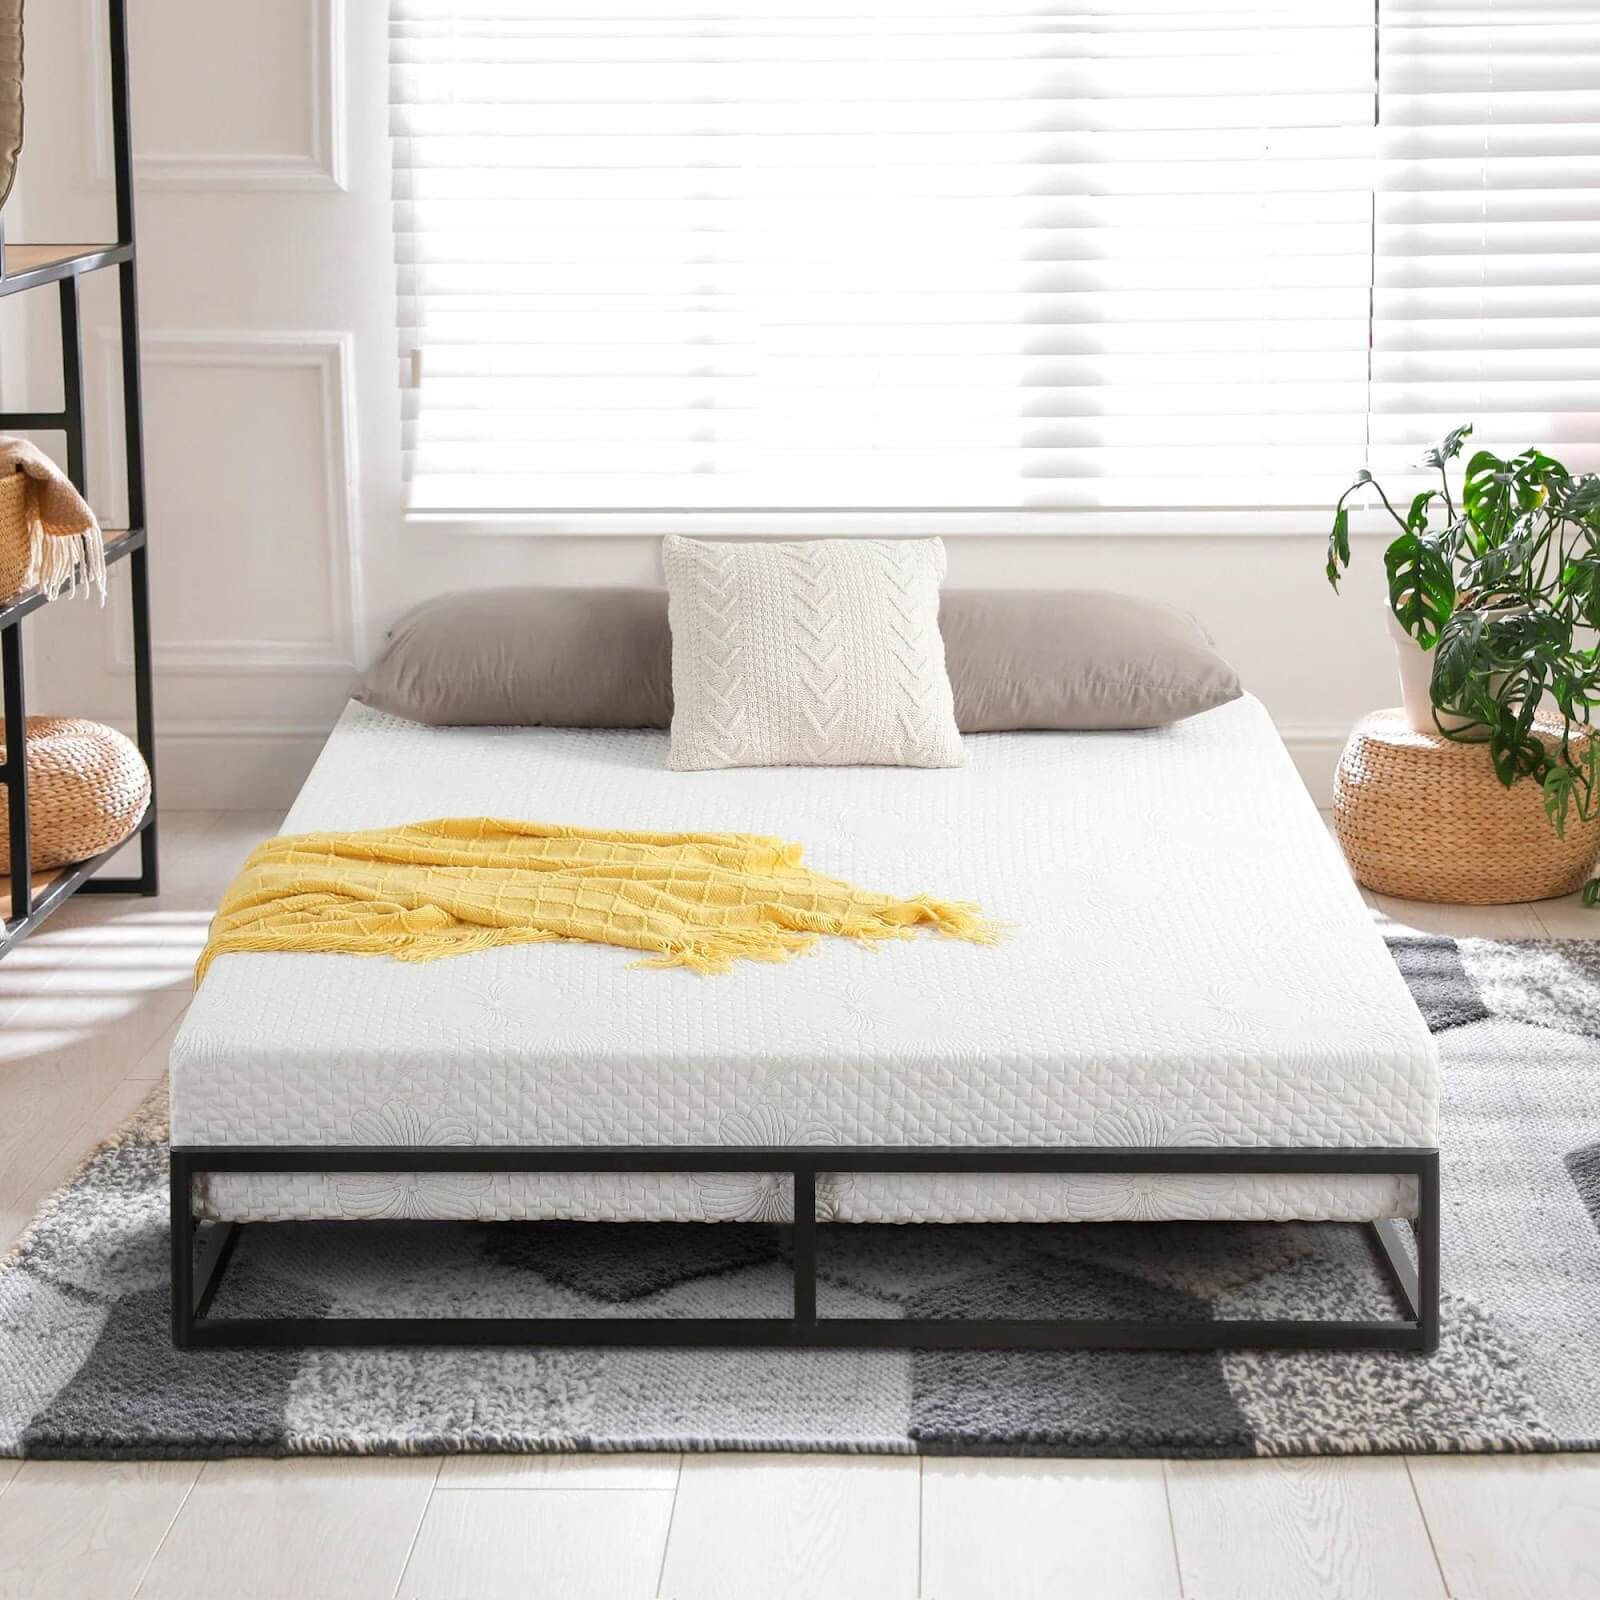 The Olee mattress offers a comfortable sleep surface